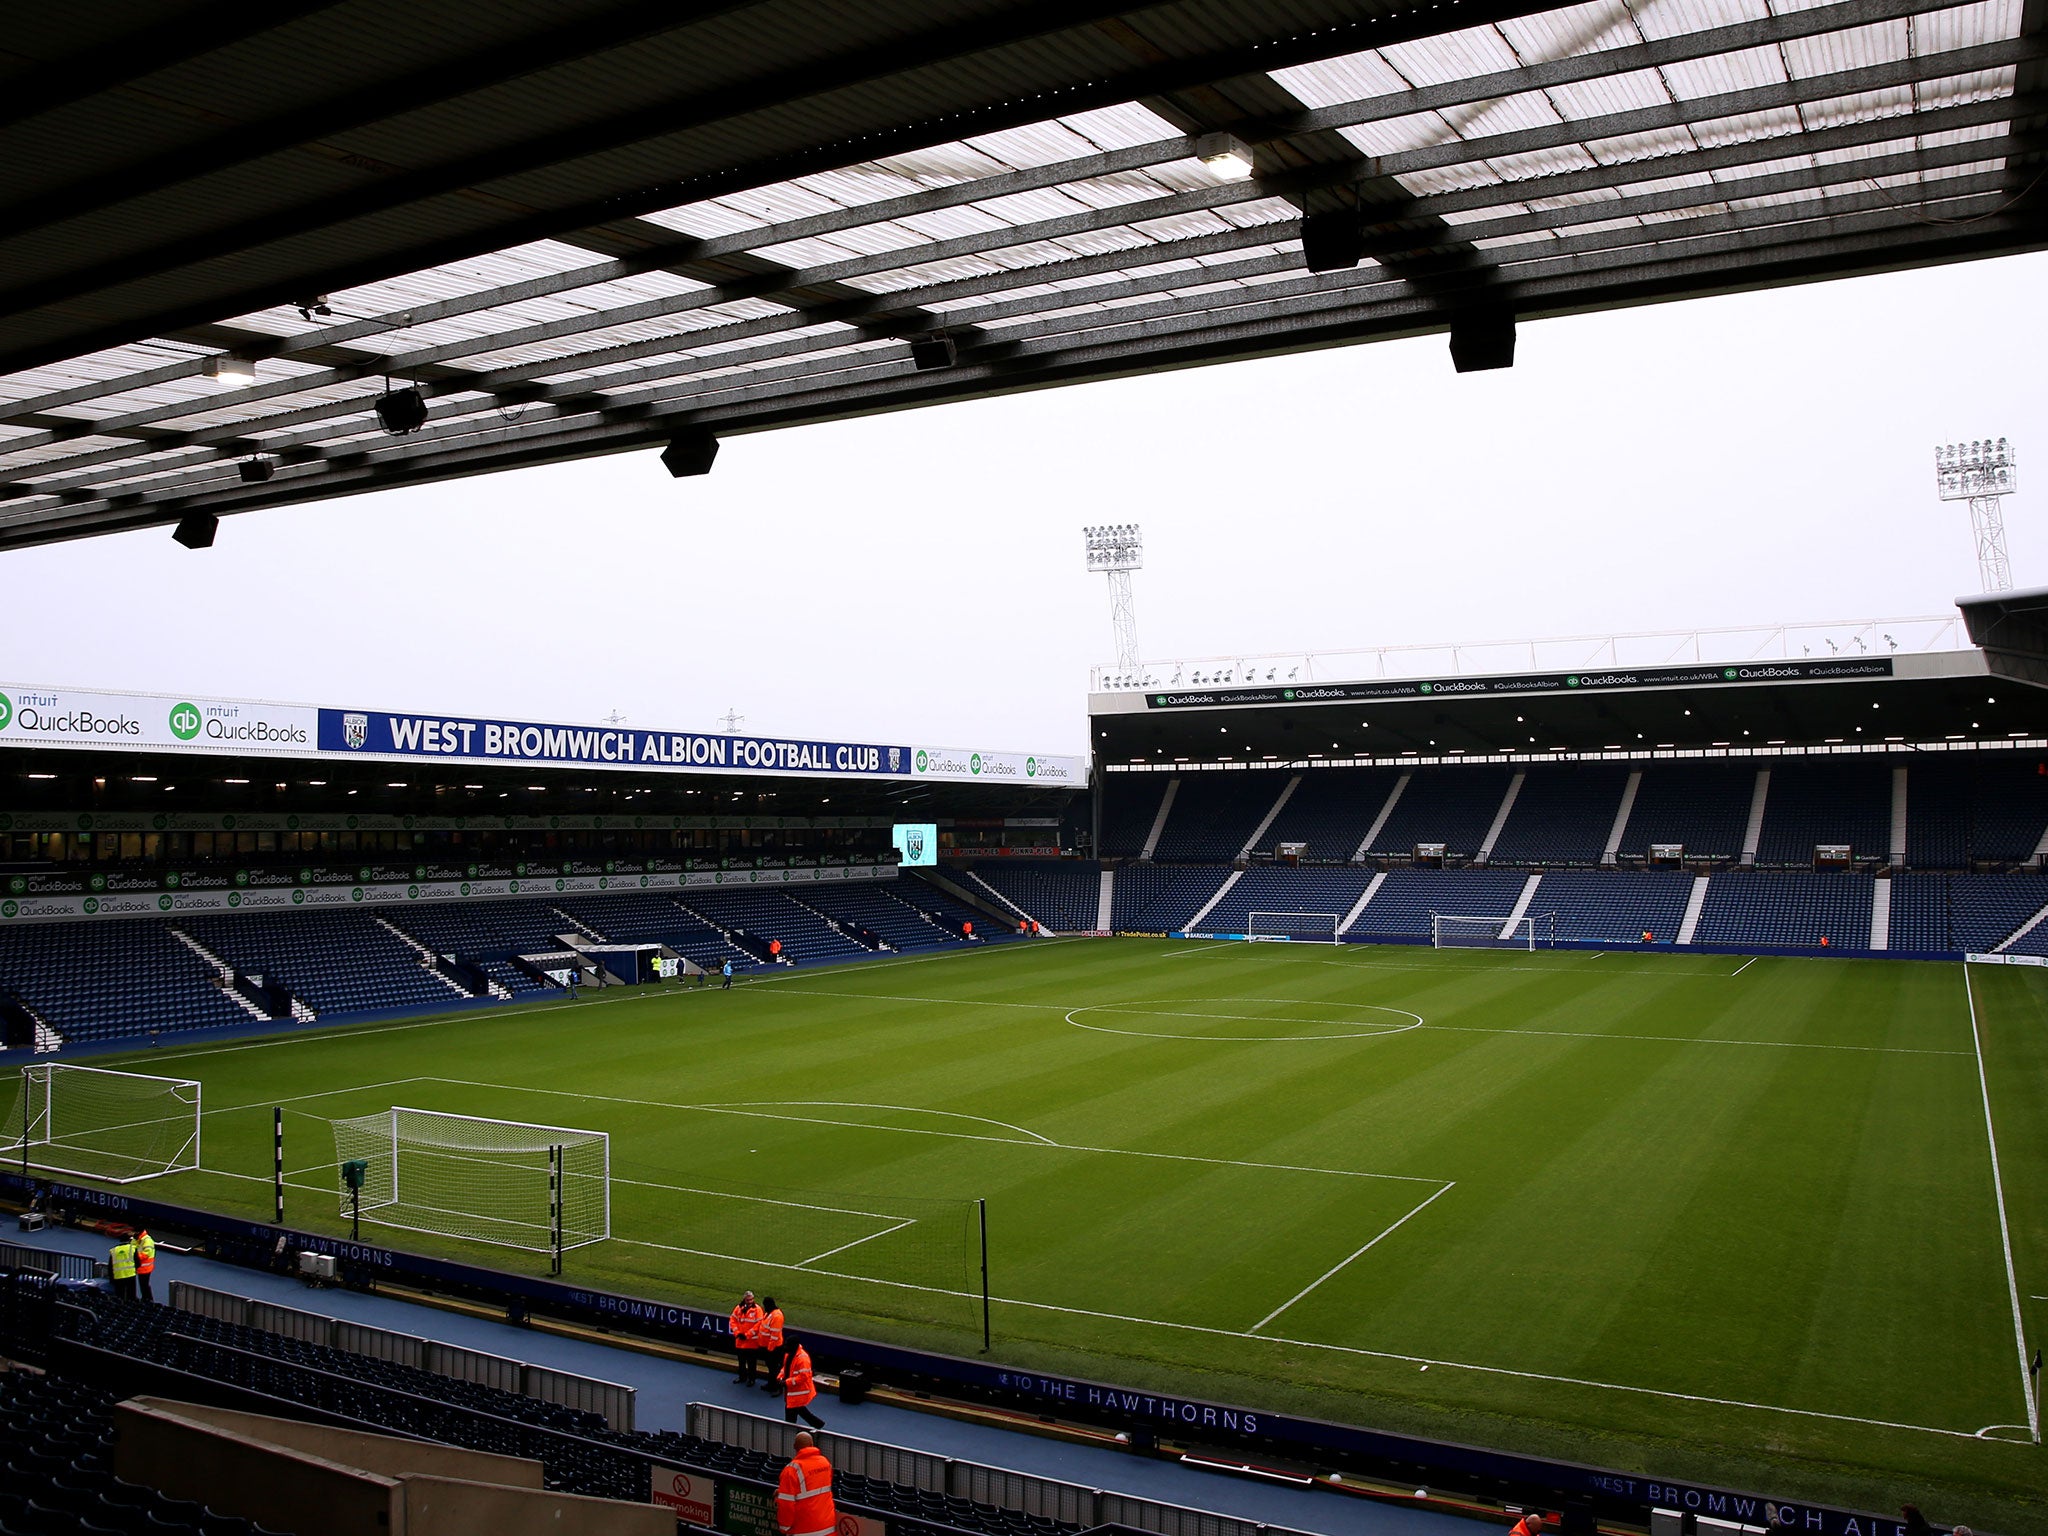 A view of West Brom's The Hawthorns stadium